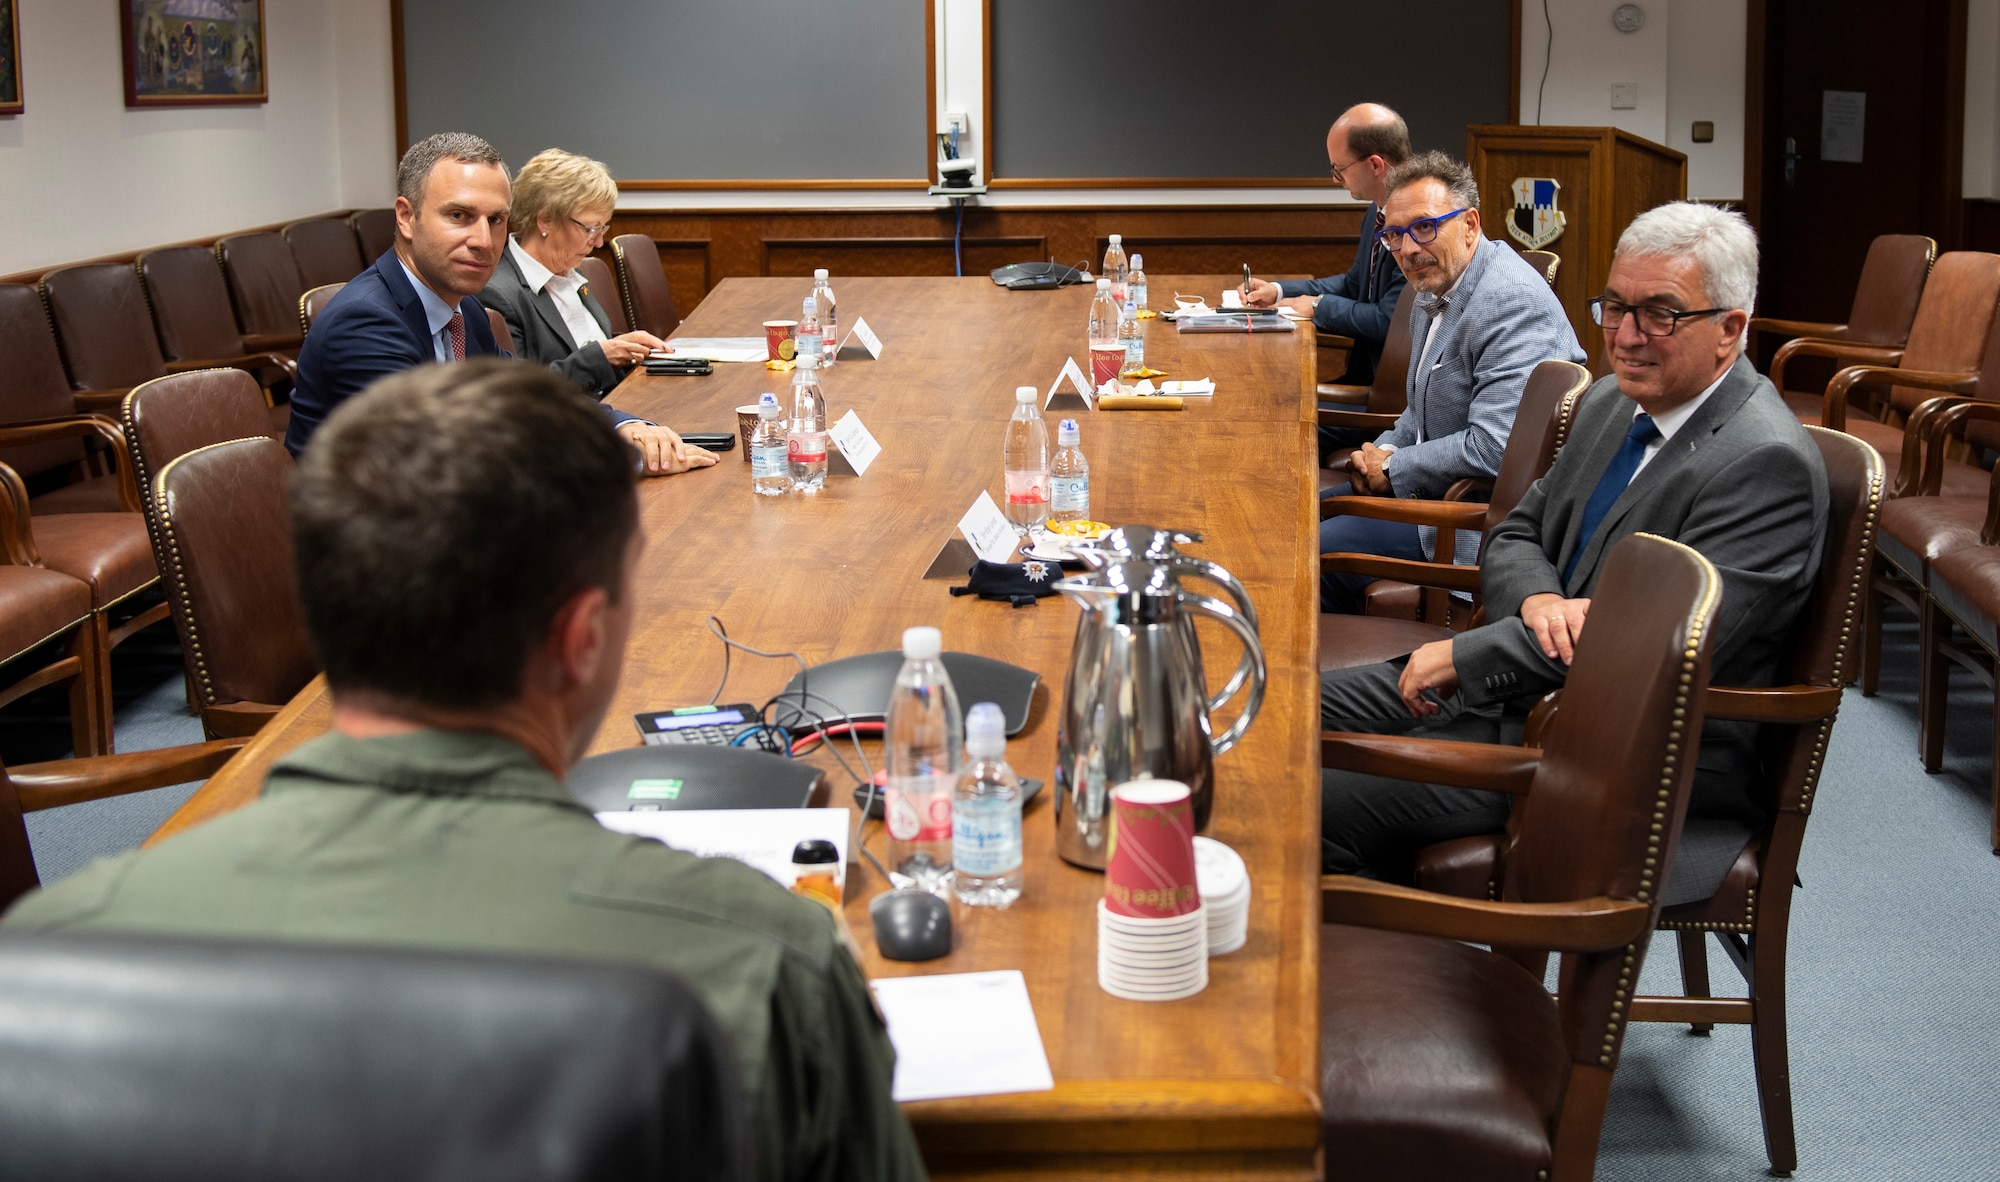 U.S. Air Force Col. David Epperson, 52nd Fighter Wing commander, meets with members of the German Parliament at Spangdahlem Air Base, Germany, Aug. 28, 2020. The Wing hosted Roger Lewentz, Minister of the Interior for the State of Rheinland-Pfalz, and presented a mission brief of Spangdahlem AB's goals and operations. (U.S. Air Force photo by Airman 1st Class Alison Stewart)